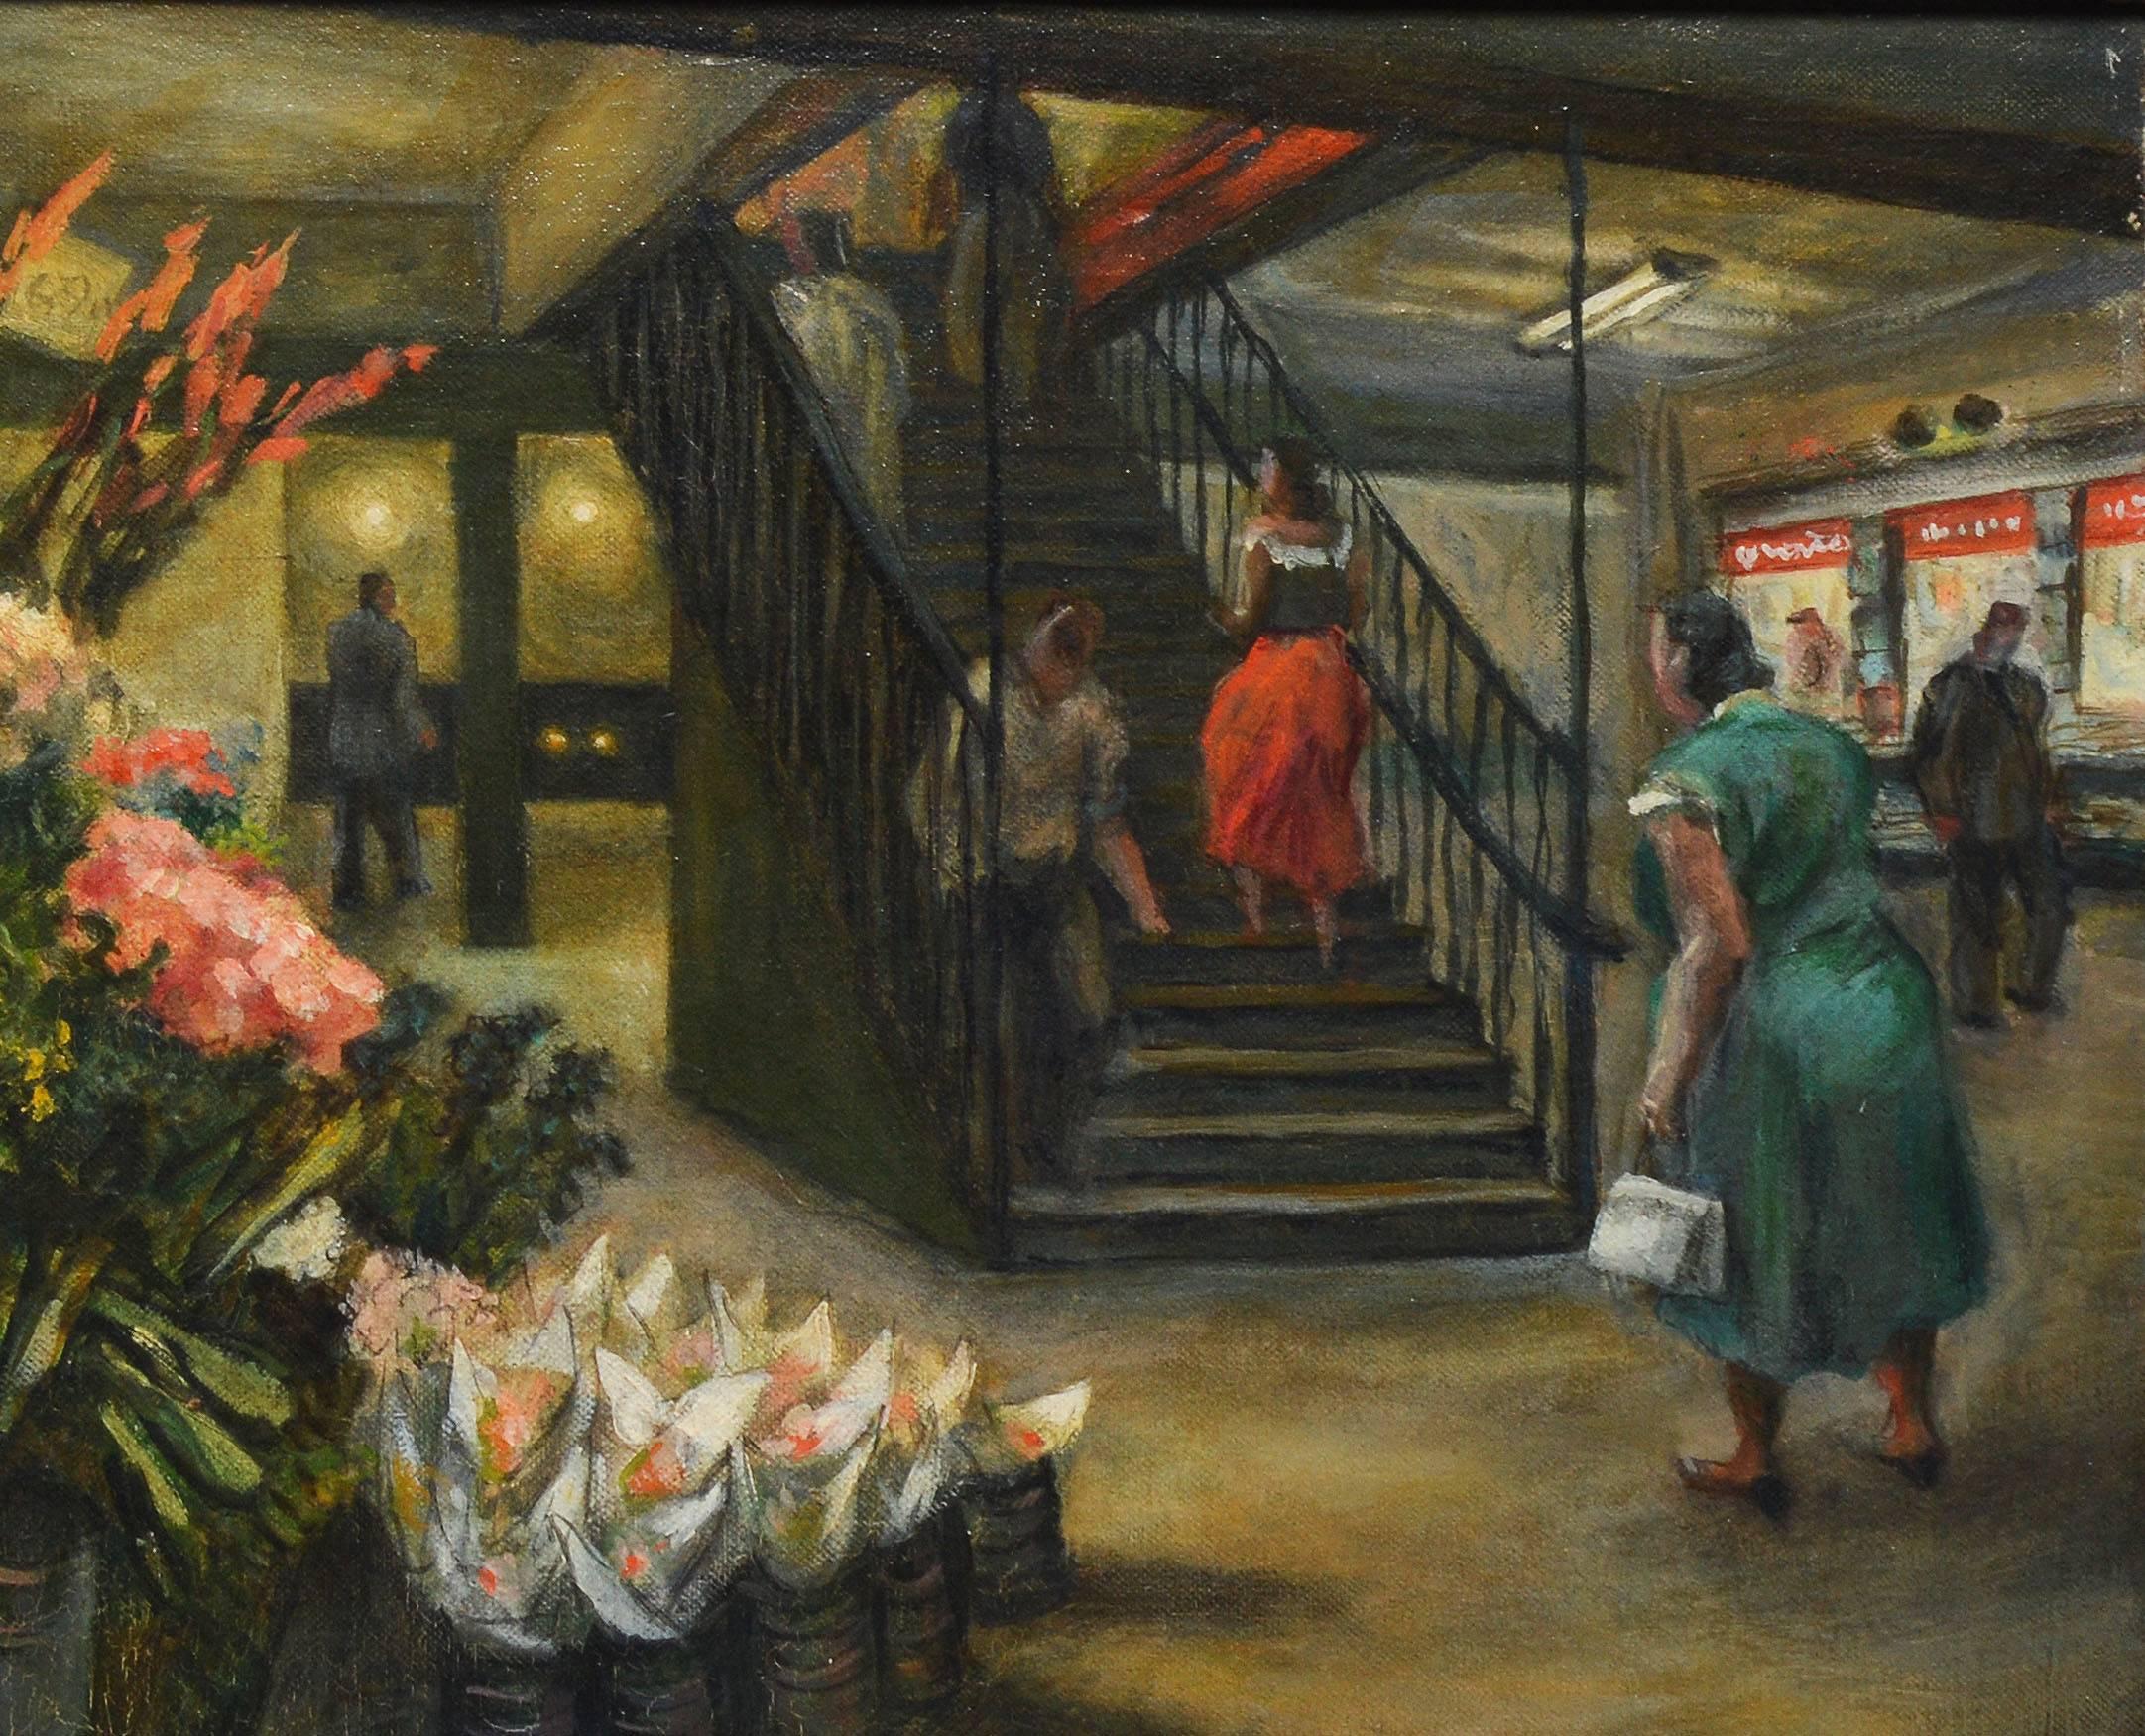 Modernist View of the New York City Subway - Brown Figurative Painting by Unknown